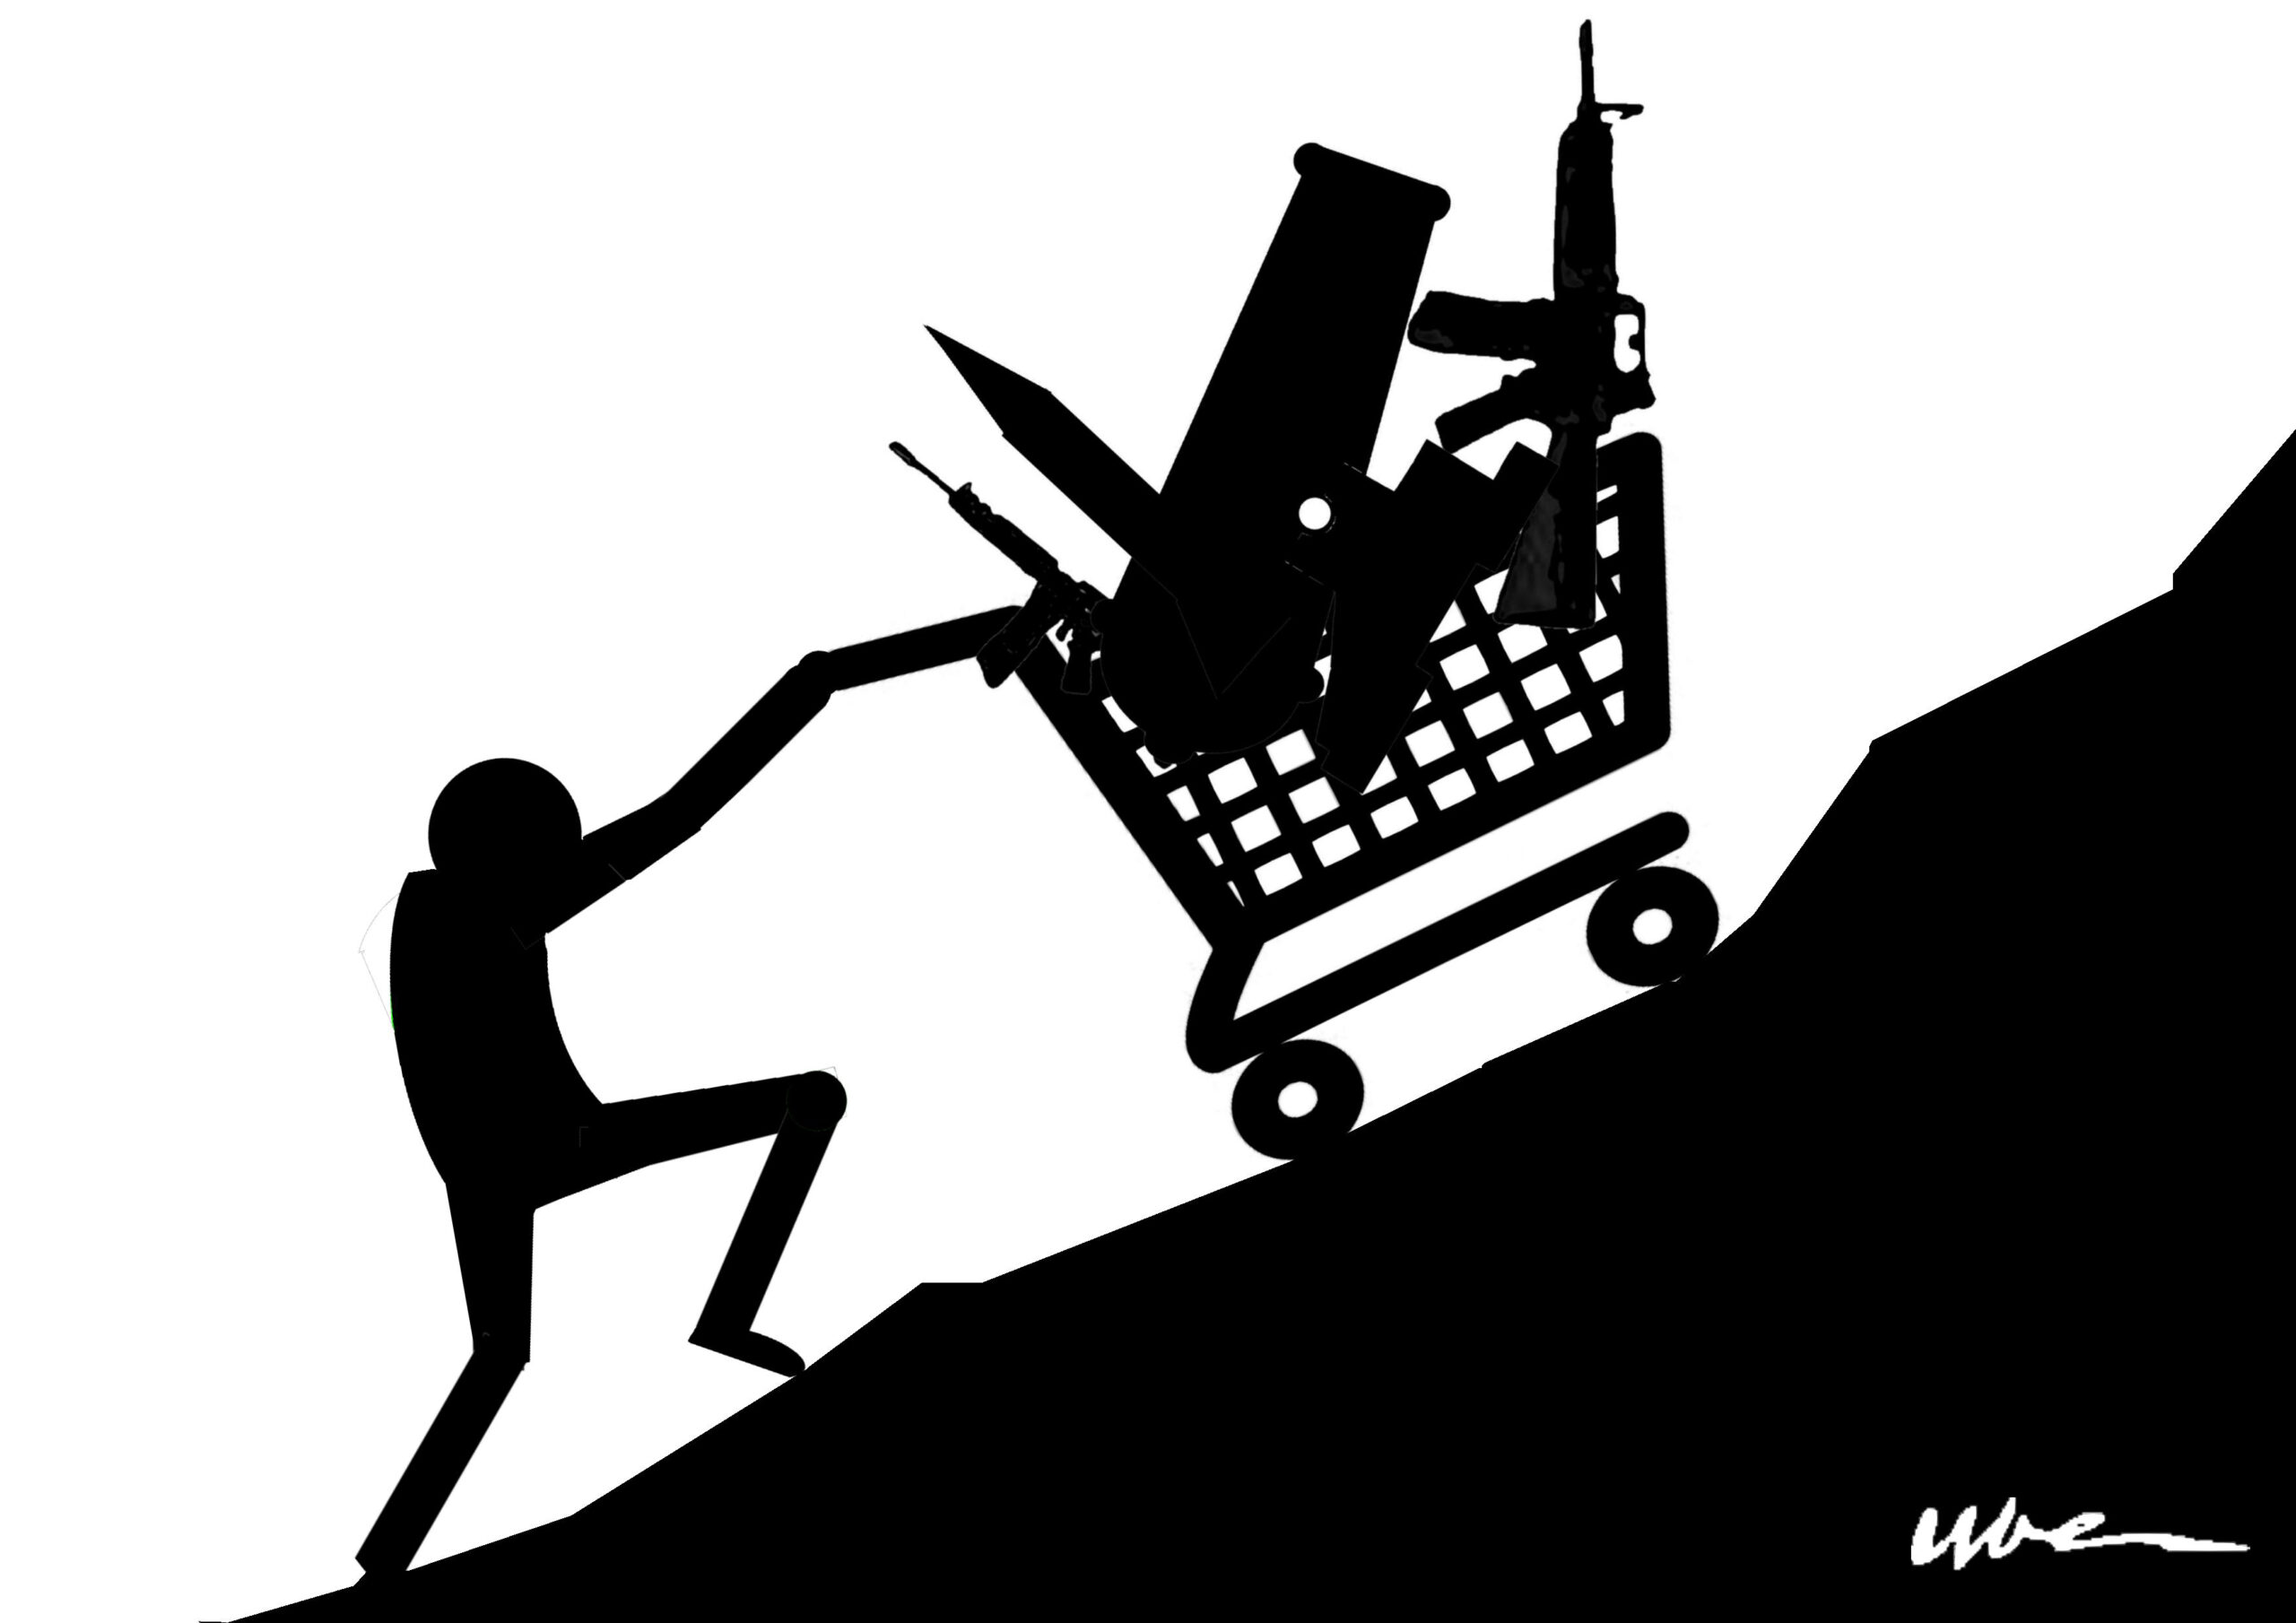 Black and white drawing, showing a person pushing a grocery cart of weapons up a steep hill.